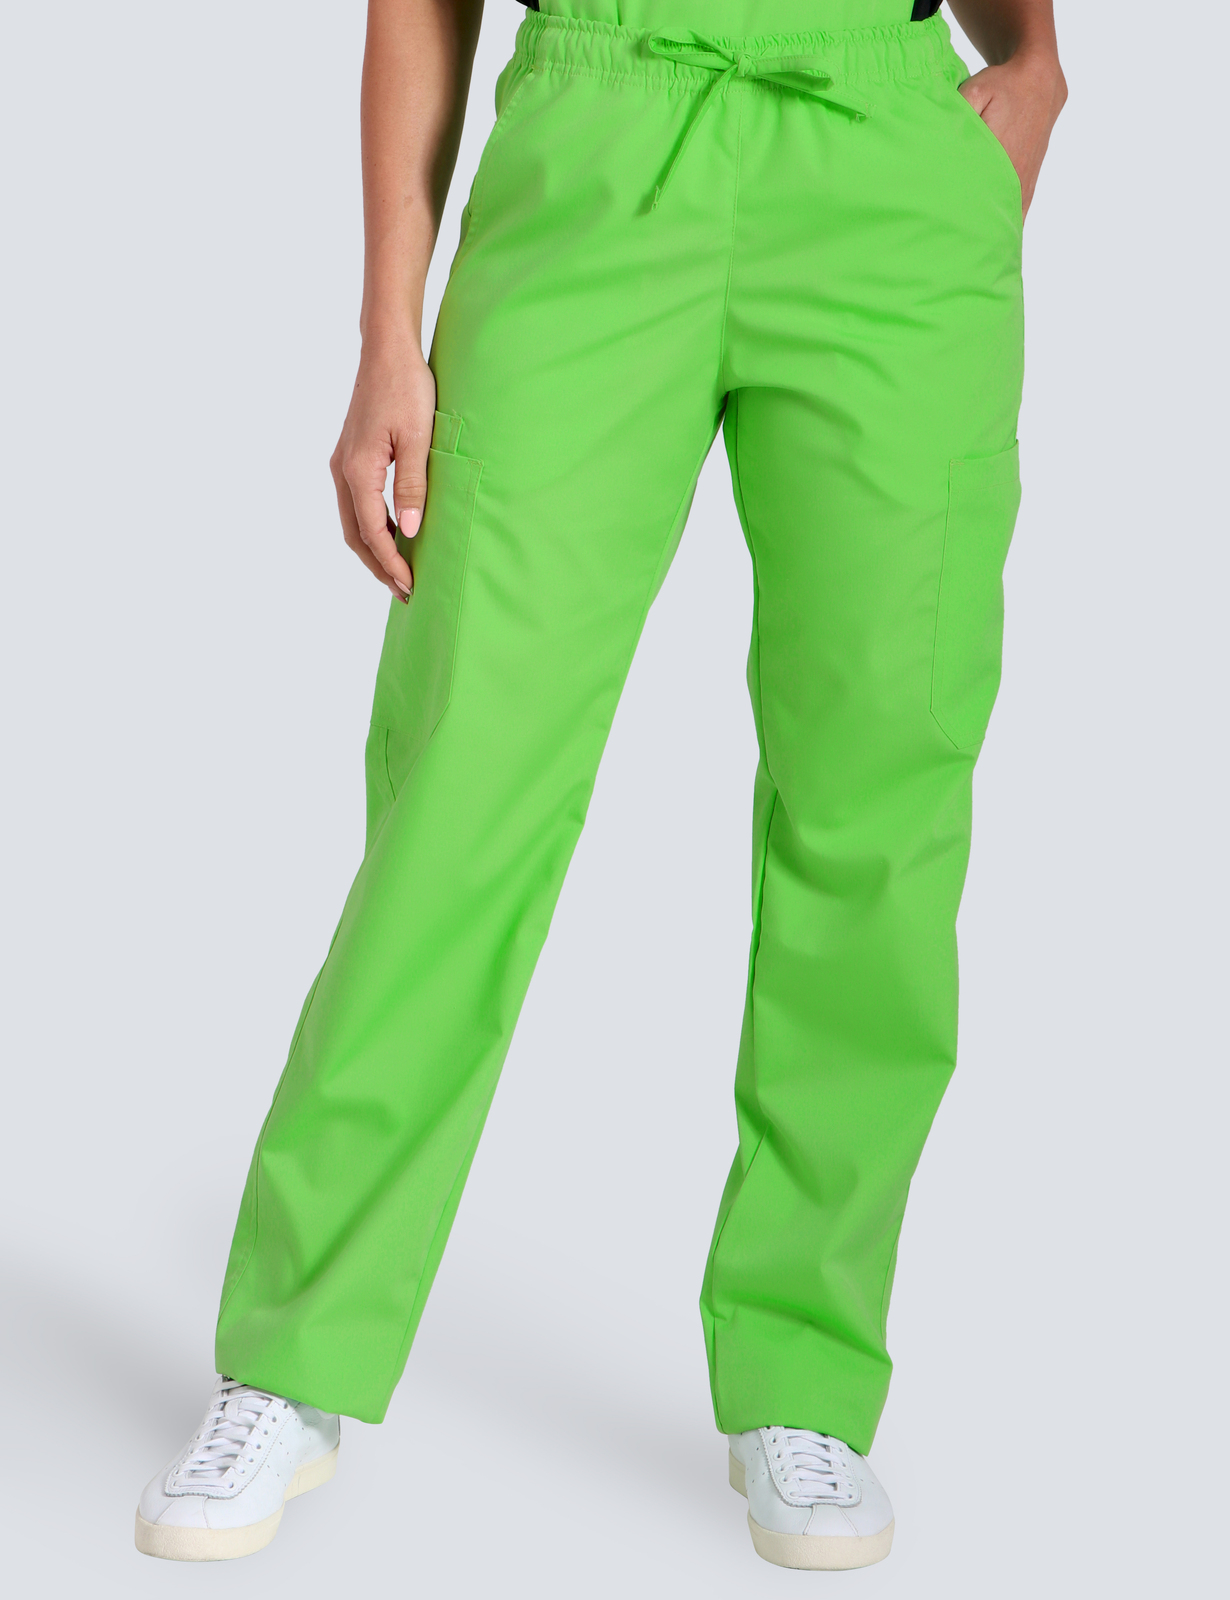 Emergency Department Cargo Pants in Lime Green